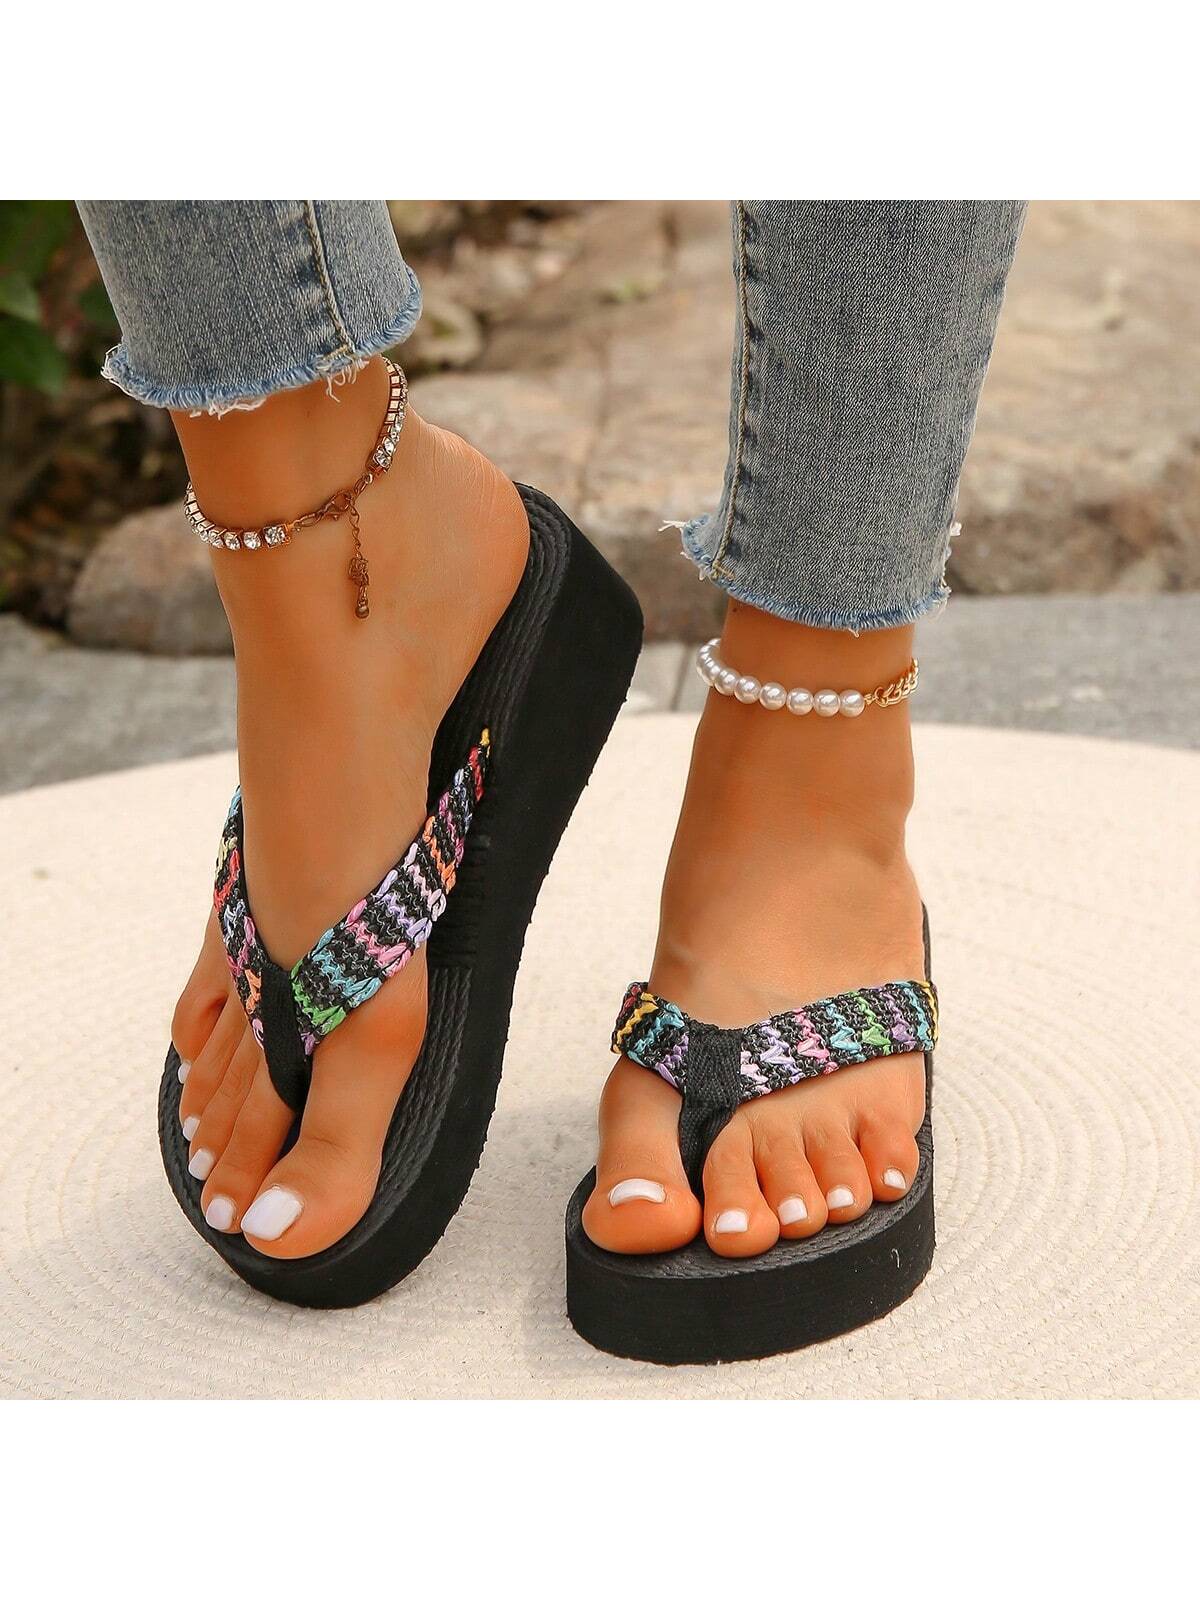 Women Thick-Soled 5cm Wedge Heel  Rope Flip-Flops Shoes, Anti-Slip And Wear-Resistant, Suitable For Casual Beach Holiday, Summer Wind Slope Heeled Slippers-Black-2